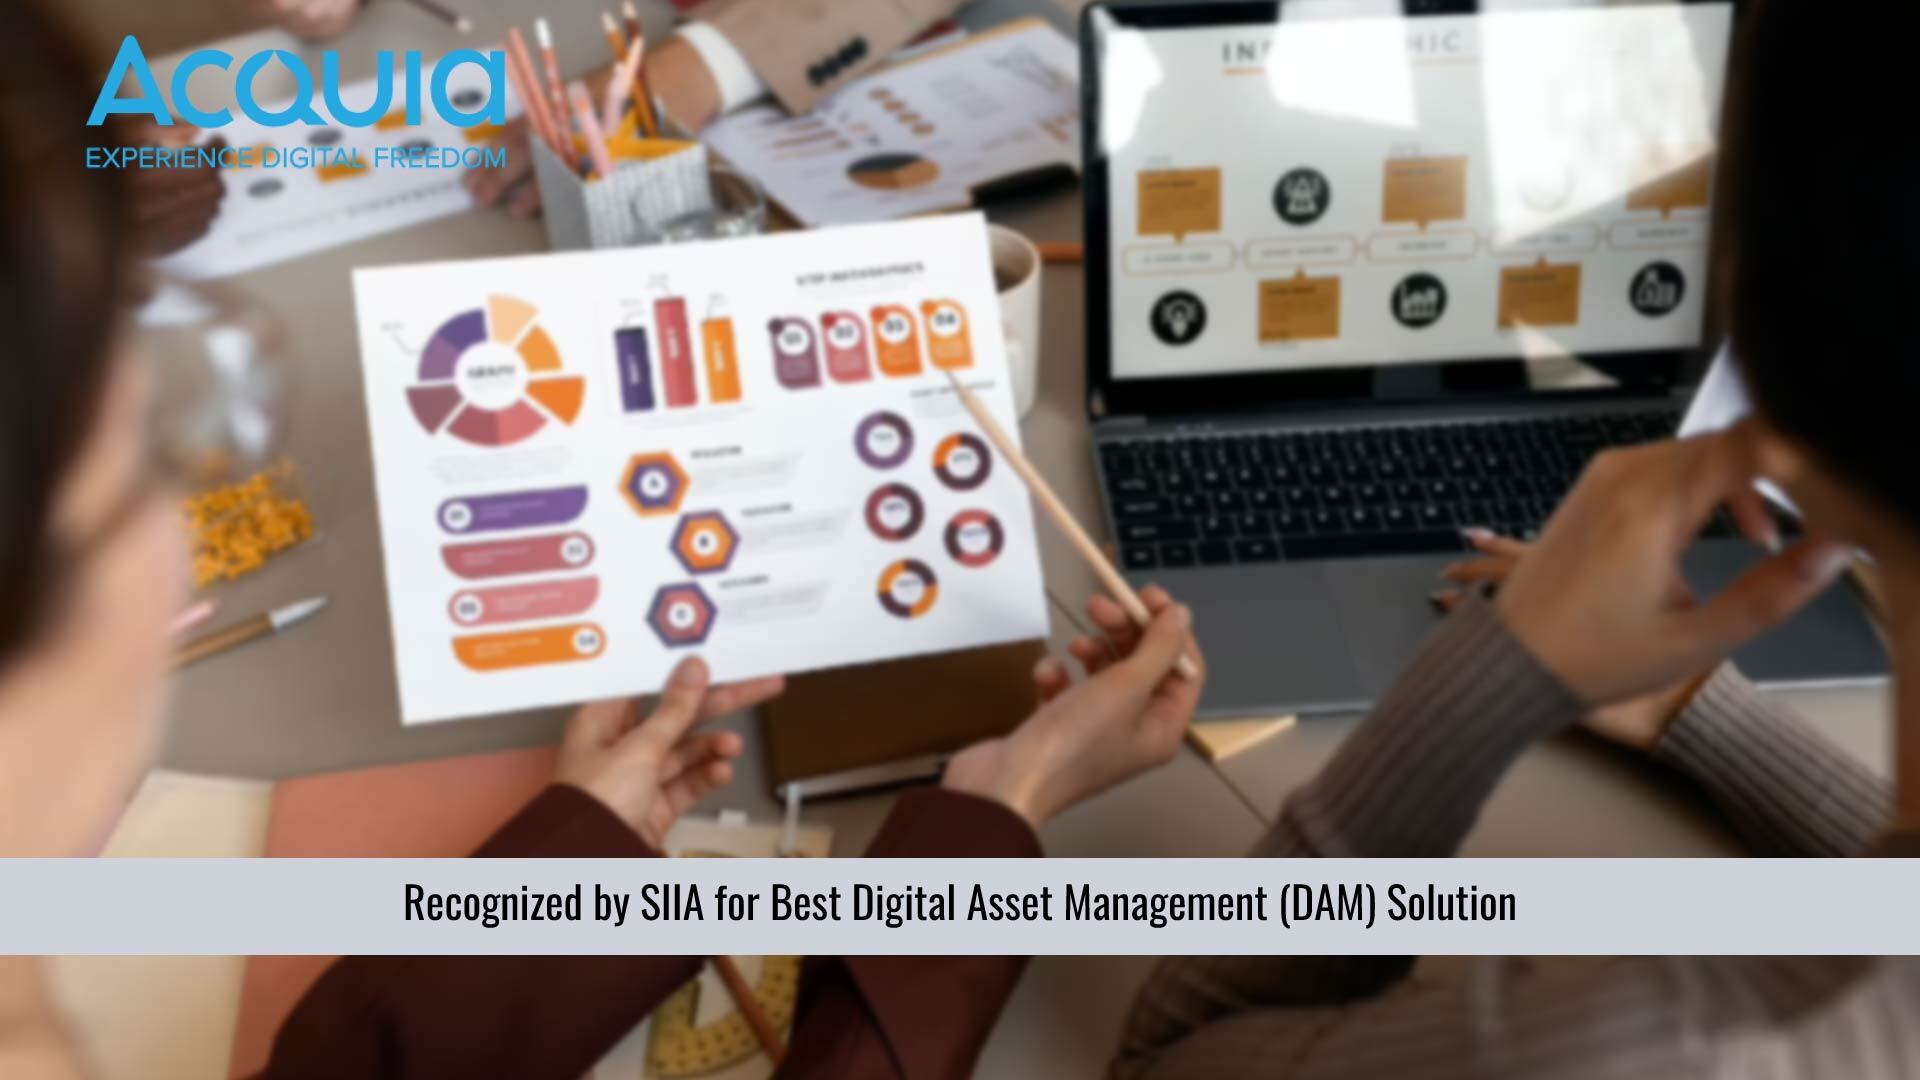 Acquia Recognized by SIIA for Best Digital Asset Management (DAM) Solution